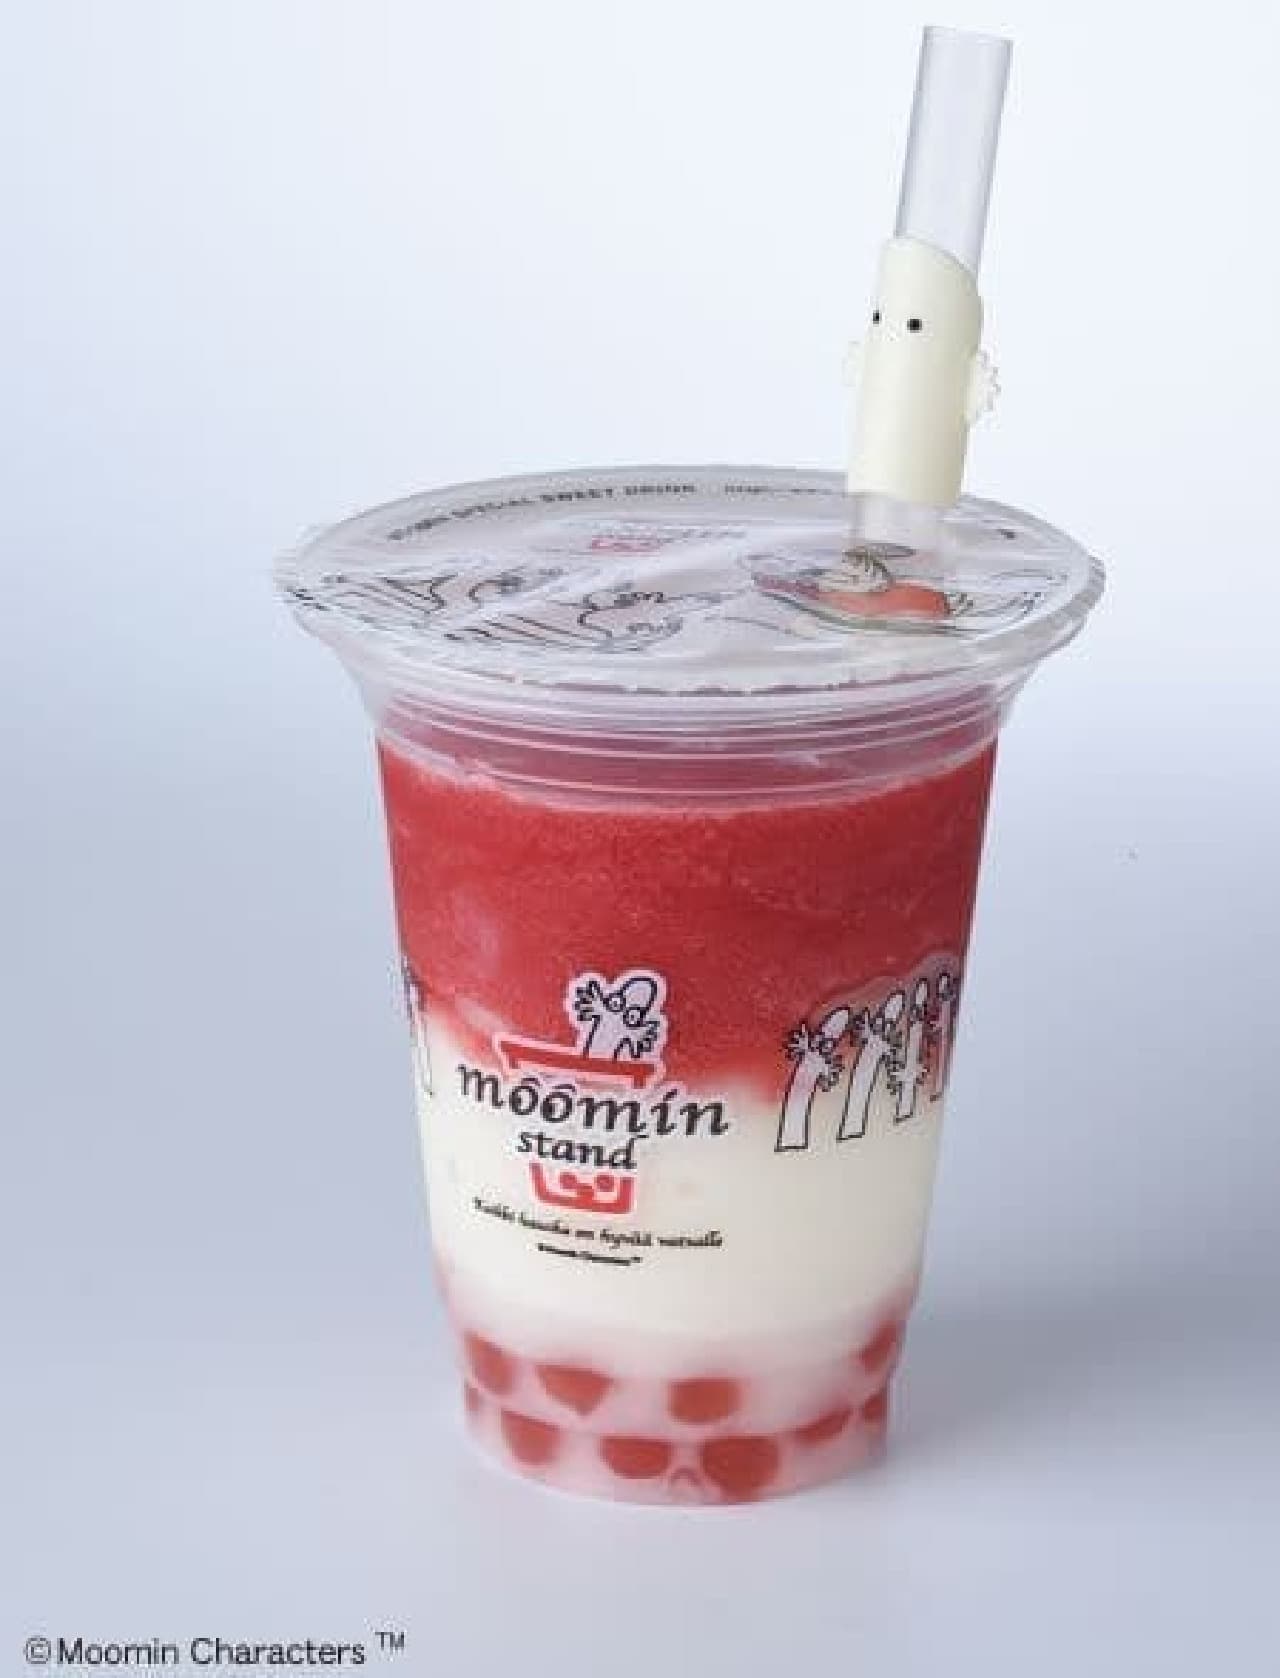 "Aurora Frozen Mixed Berry & Yogurt" is a frozen drink divided into two layers